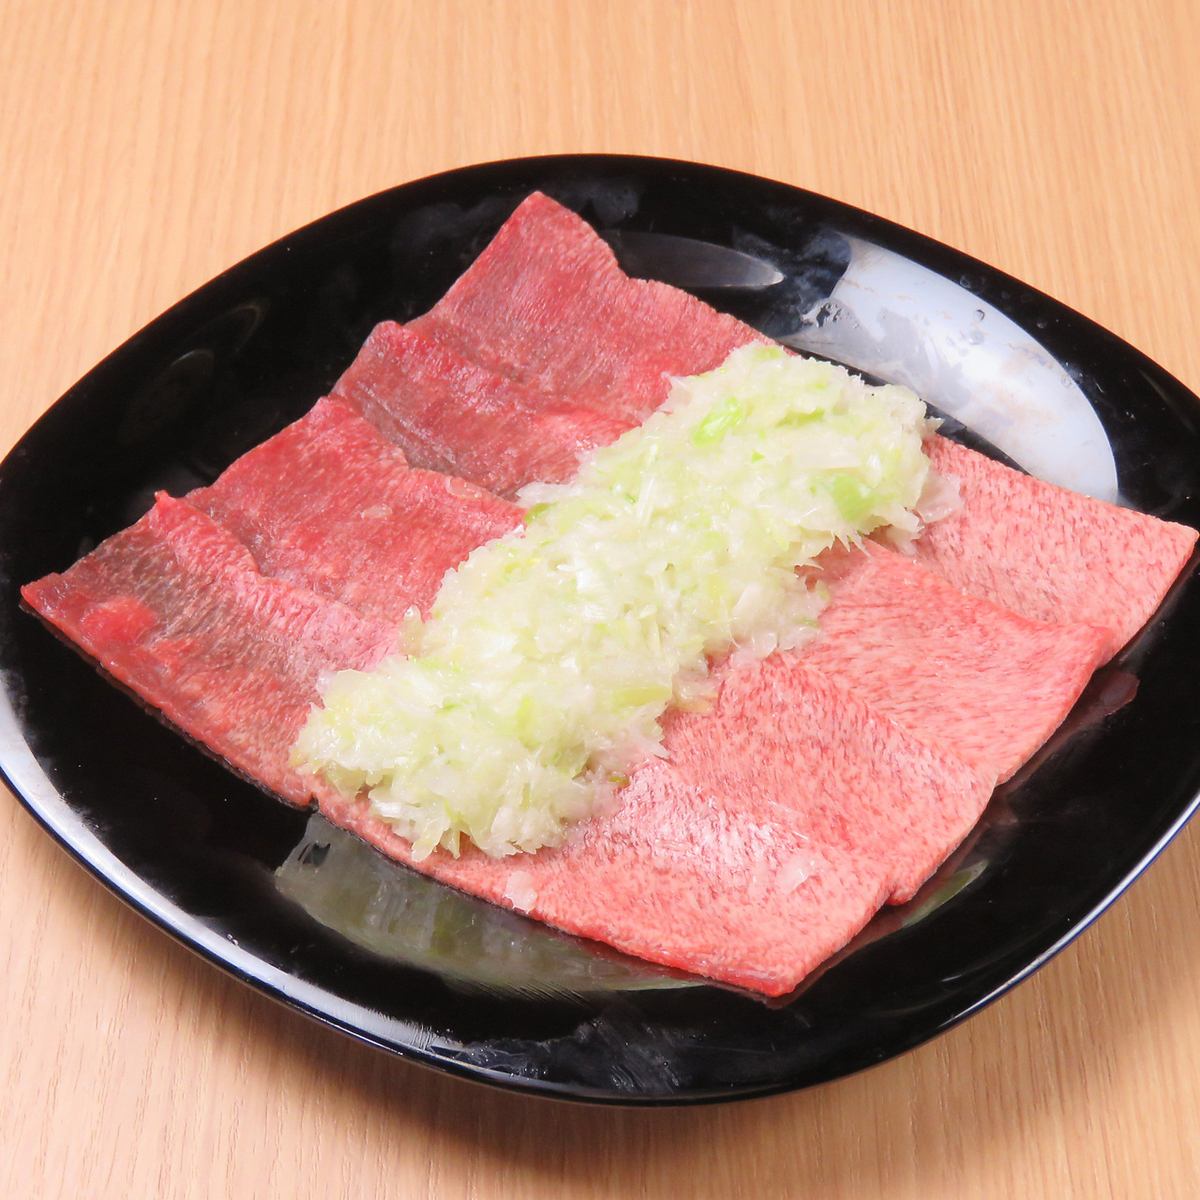 Enjoy our specialty yakiniku to your heart's content!